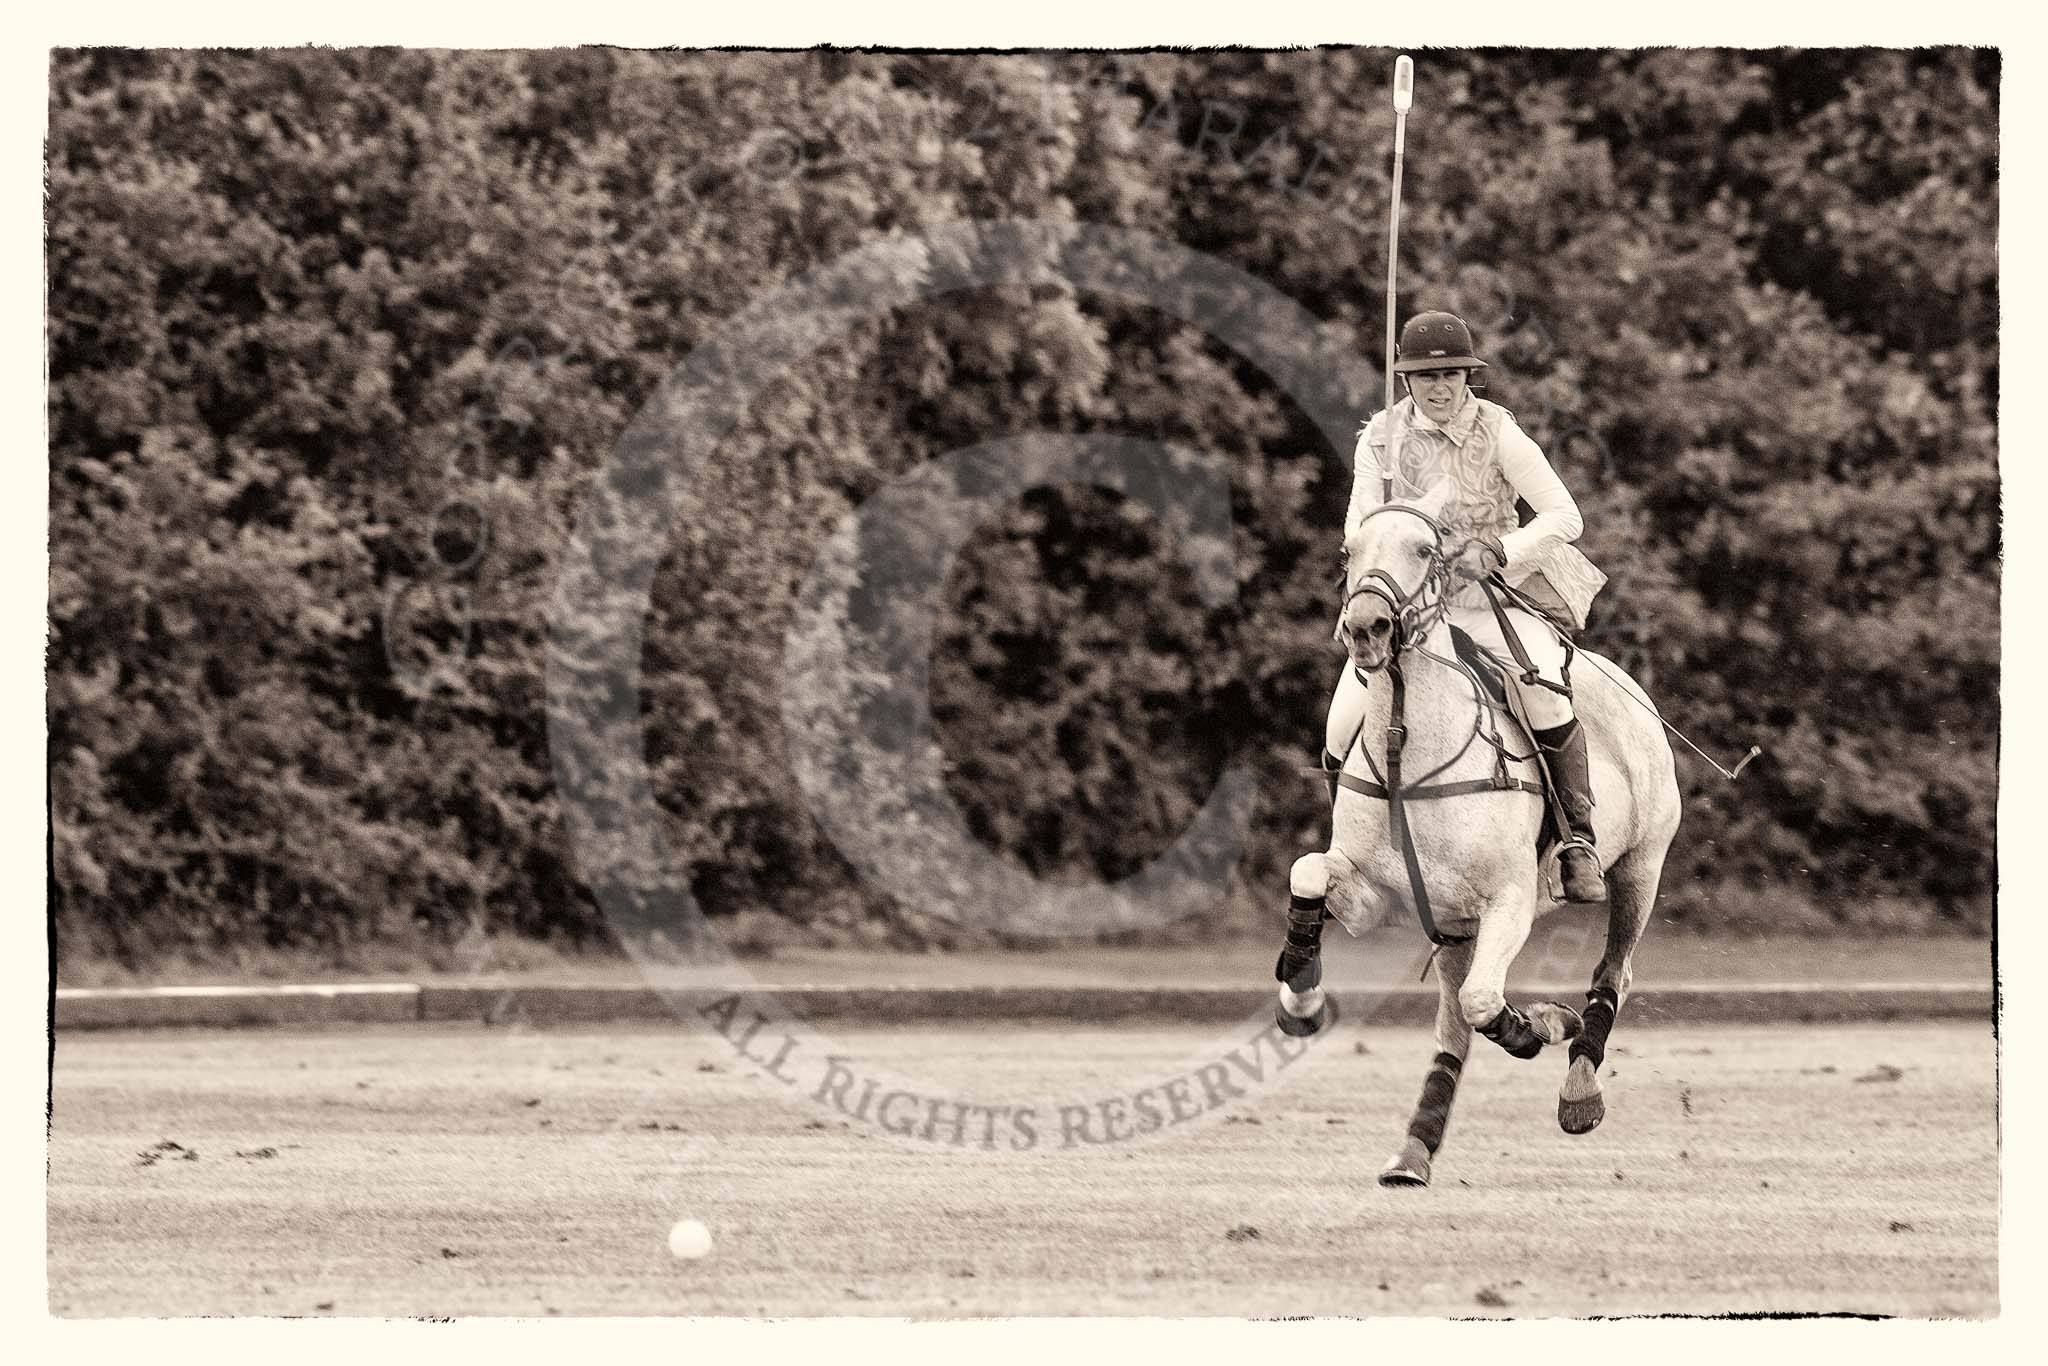 7th Heritage Polo Cup semi-finals: The Amazons of Polo Team sponsored by Polistas - Barbara P Zingg..
Hurtwood Park Polo Club,
Ewhurst Green,
Surrey,
United Kingdom,
on 04 August 2012 at 13:14, image #111